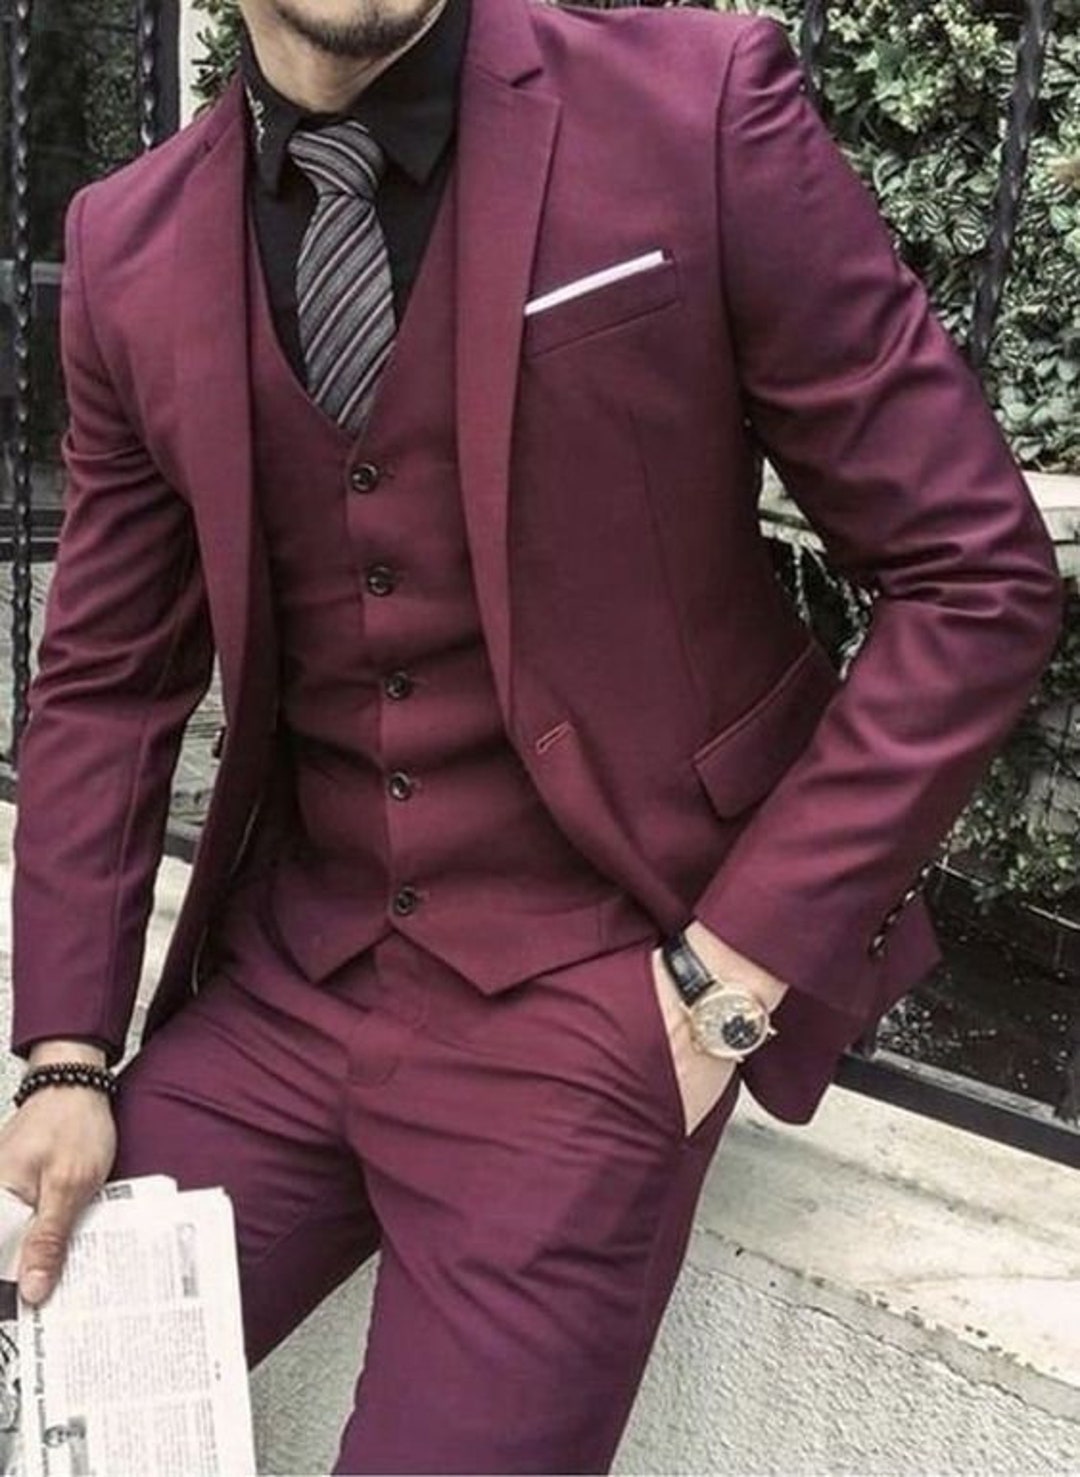 Burgundy Suit for Men 3 Piece Suit for Groom and Groomsmen - Etsy